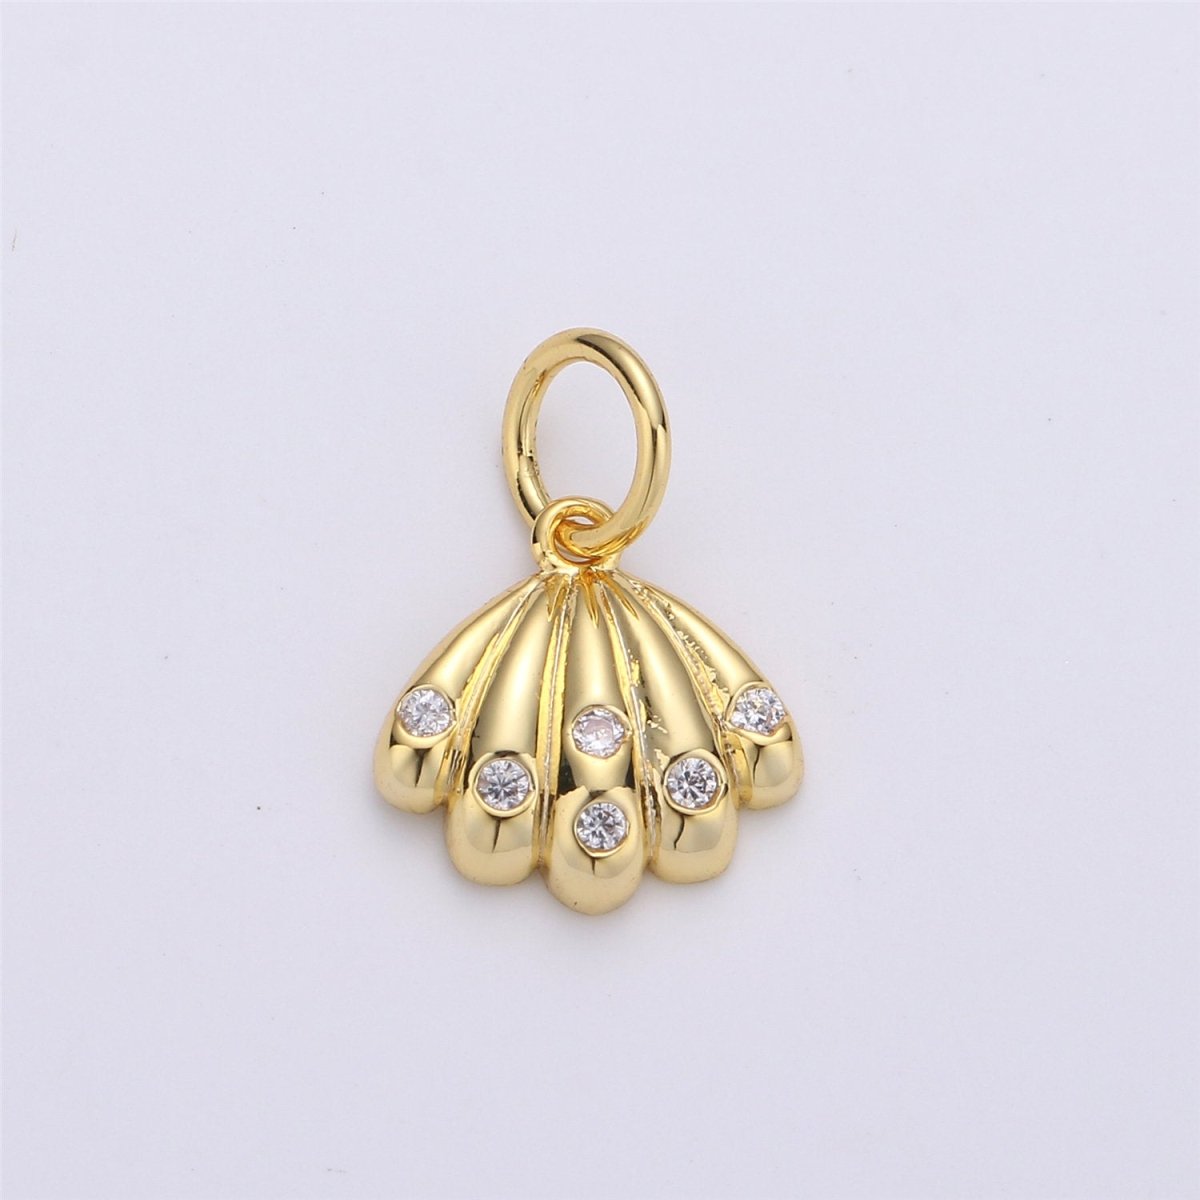 24k gold filled Shell Pendant Charm,Gold Filled Sea Shell Seashell, ocean sea life Charms, Silver Scallop Shell Charm for Bracelet Necklace D-007 D-008 - DLUXCA